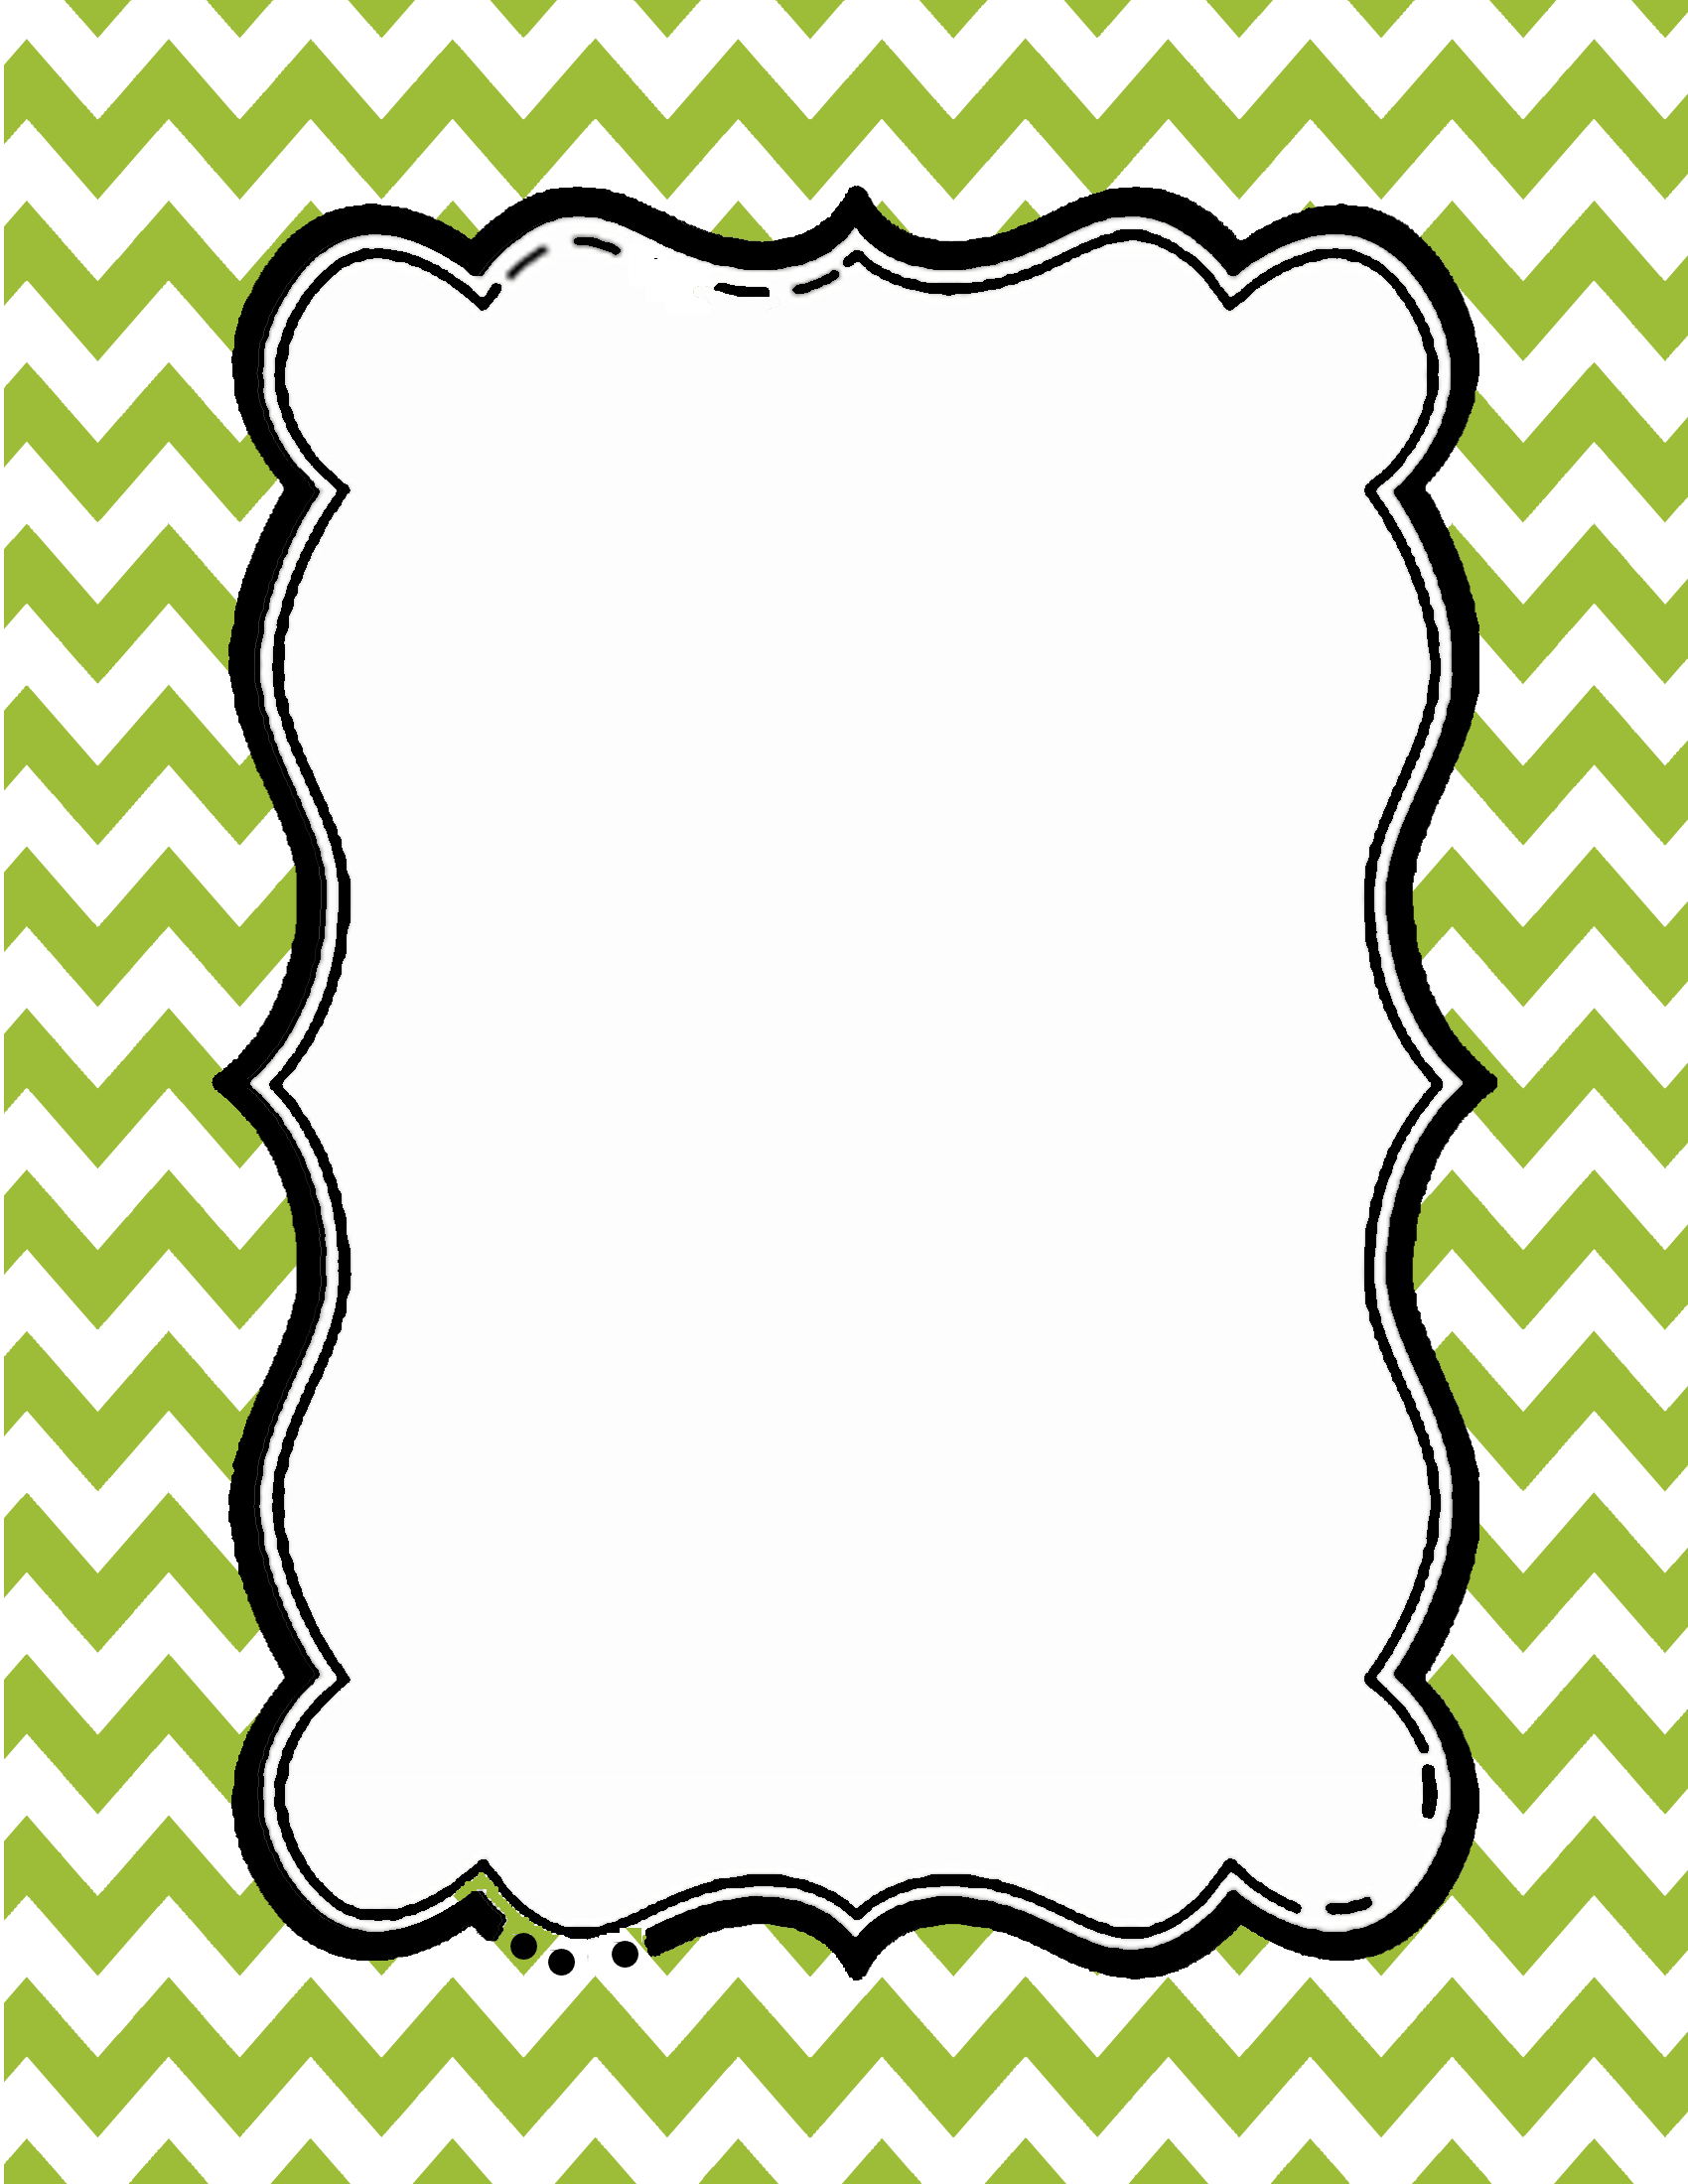 Chevron Border | Free Download in Any Color You Want